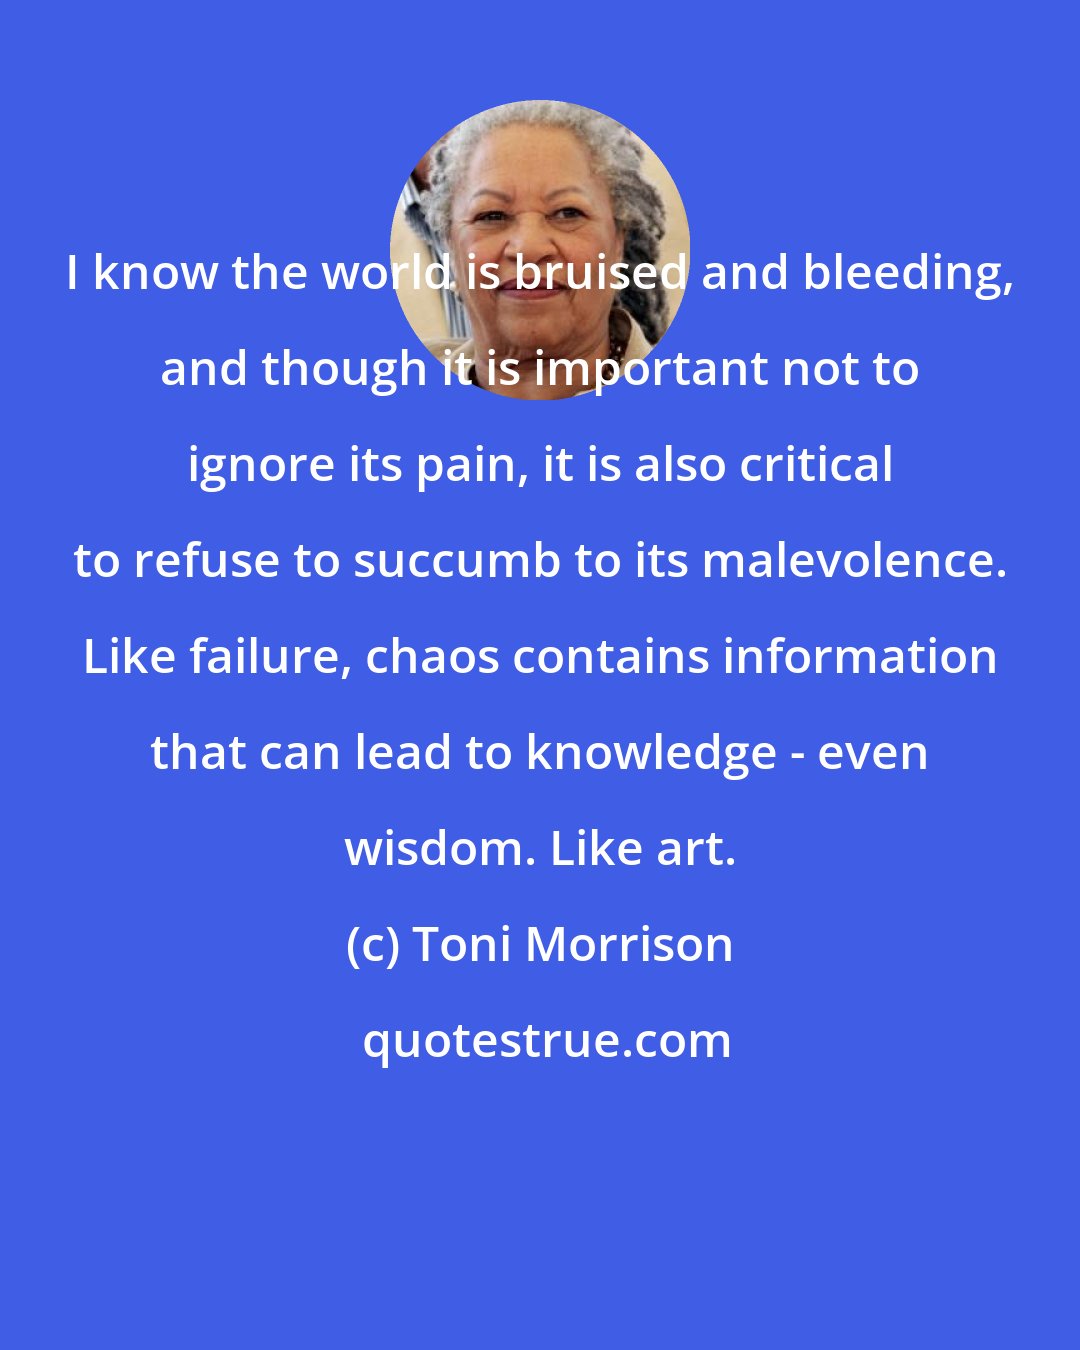 Toni Morrison: I know the world is bruised and bleeding, and though it is important not to ignore its pain, it is also critical to refuse to succumb to its malevolence. Like failure, chaos contains information that can lead to knowledge - even wisdom. Like art.